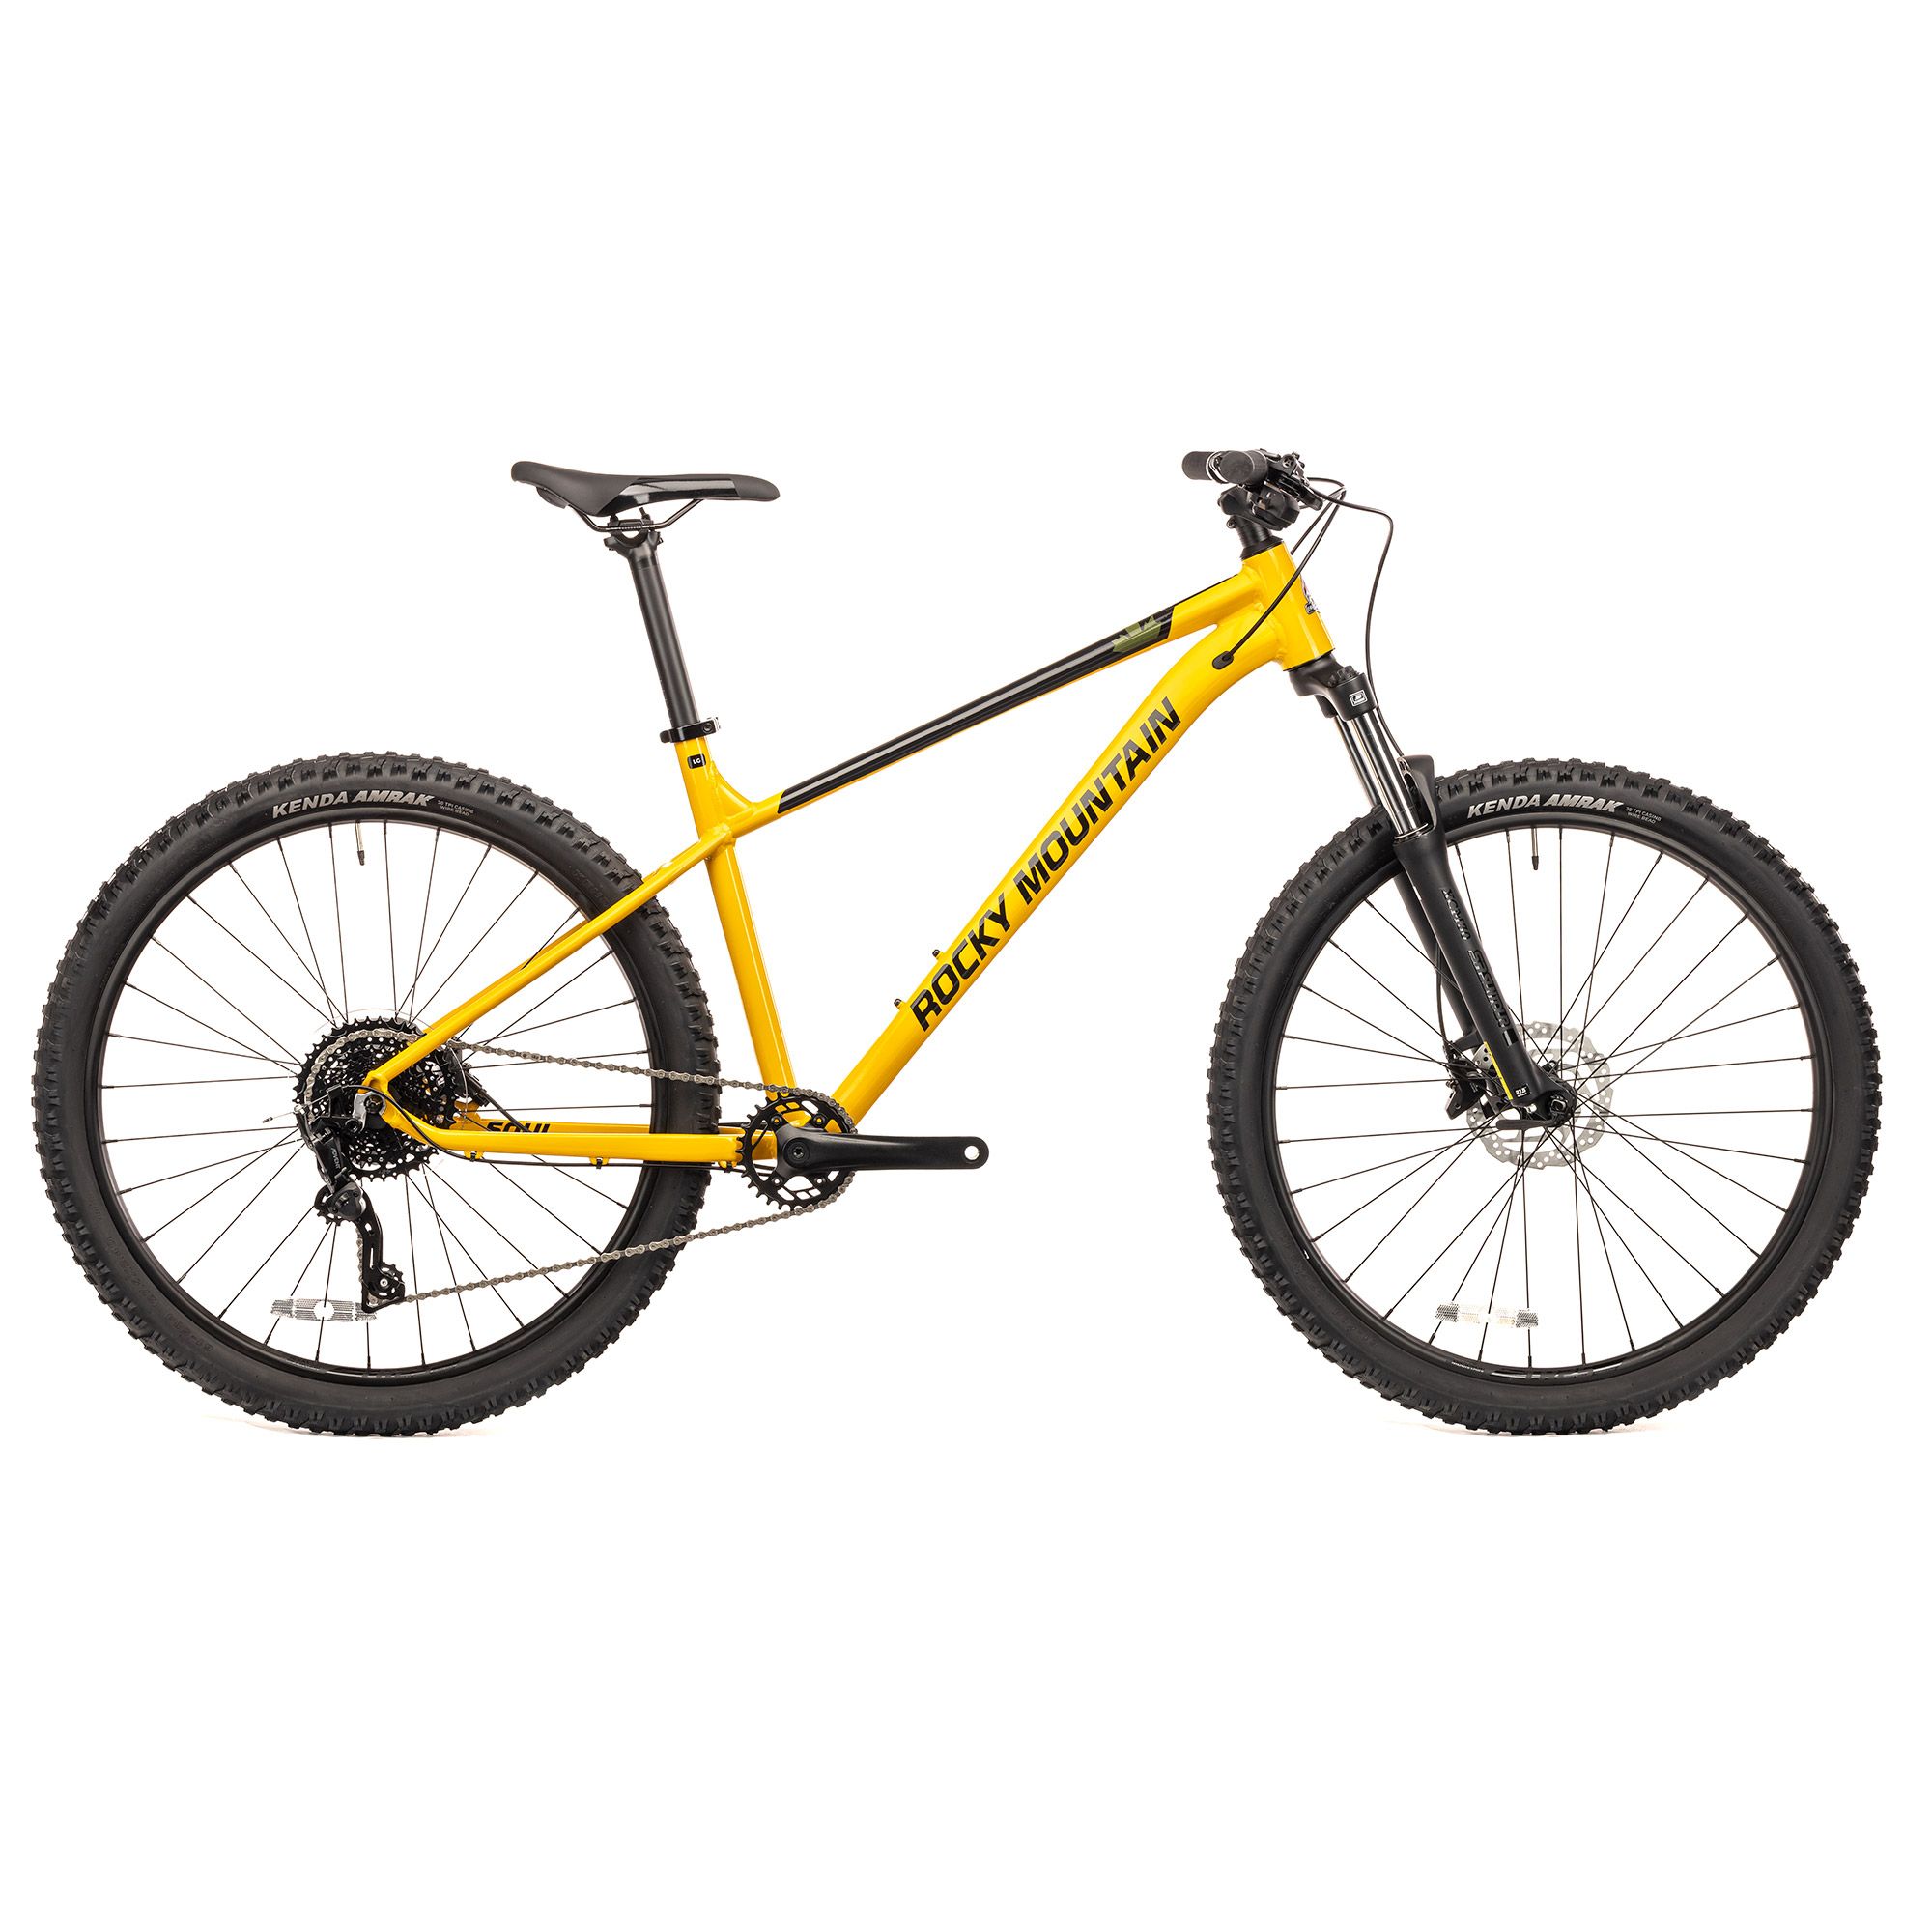 Top 5 Best Hardtail Mountain Bikes For Under £1500